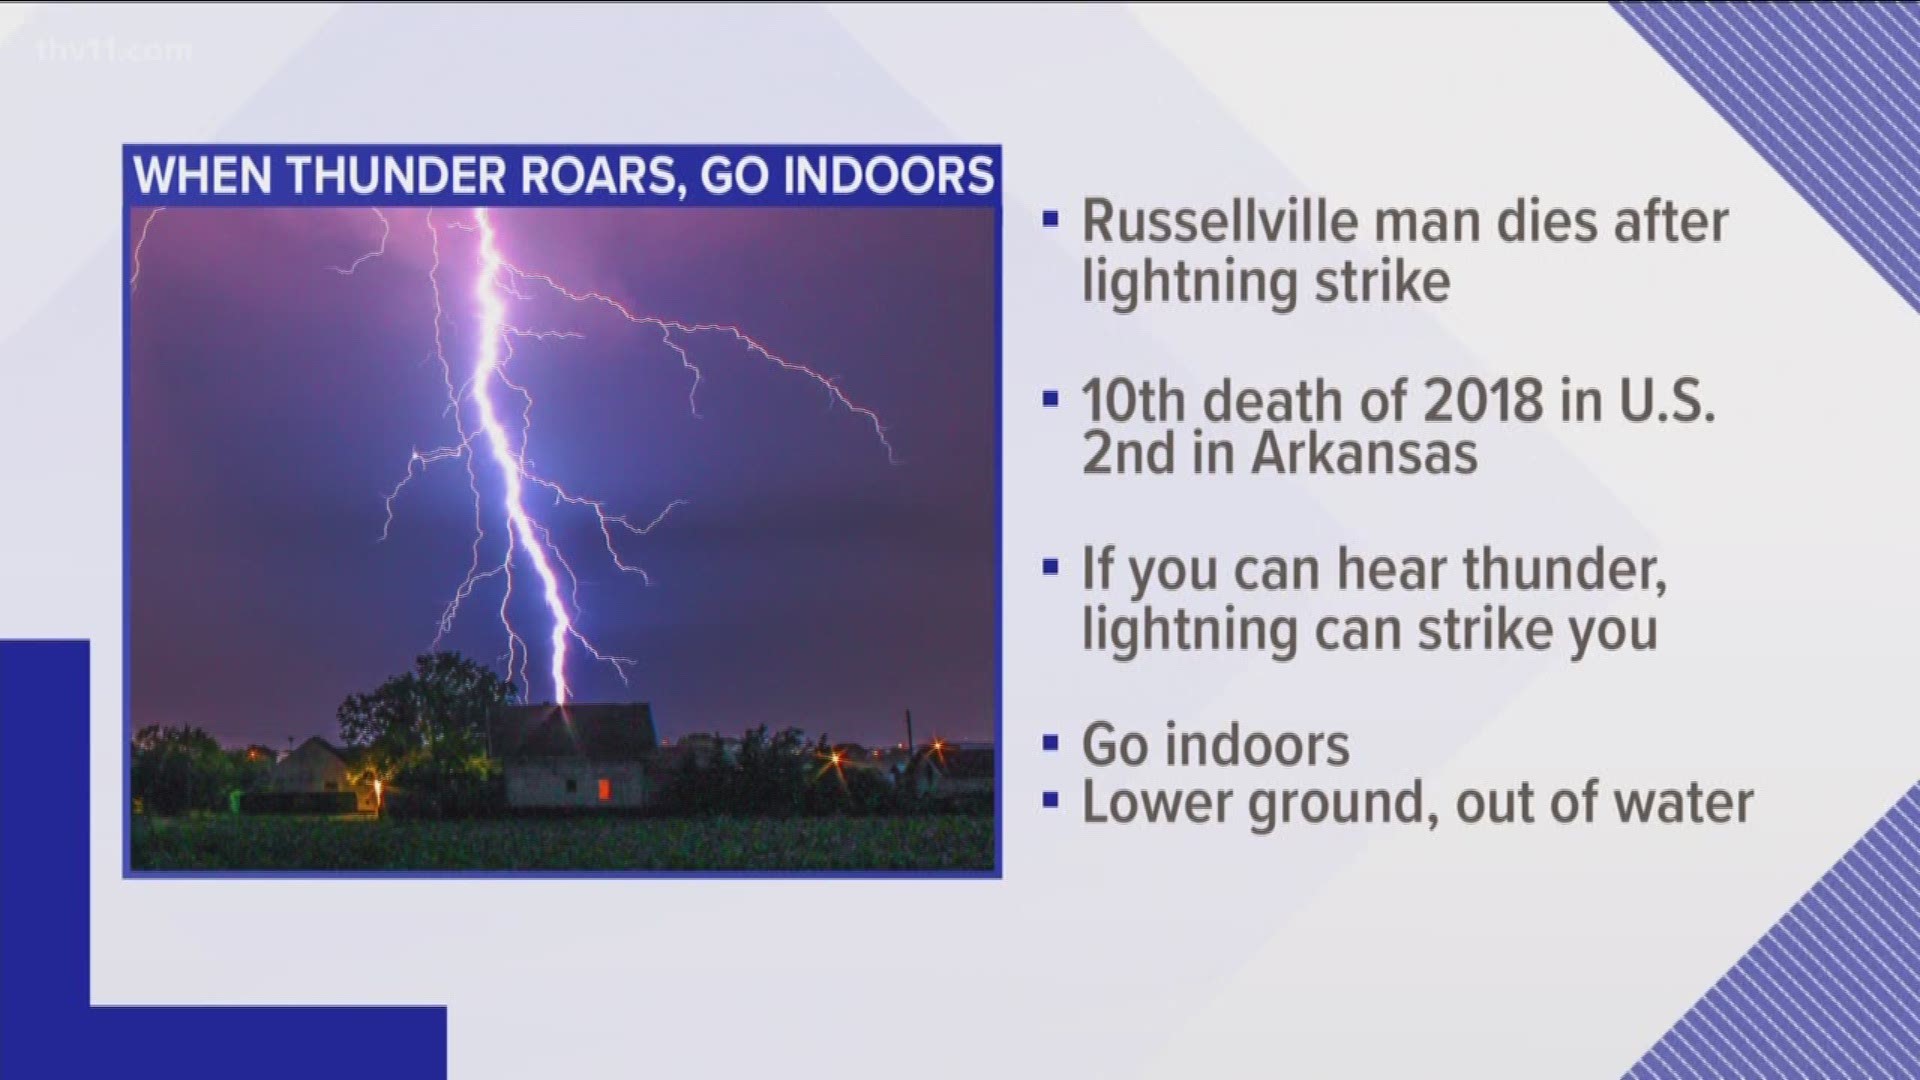 A MAN DIED AFTER HE WAS STRUCK BY LIGHTNING FRIDAY AFTERNOON AT HIS RUSSELLVILLE HOME.